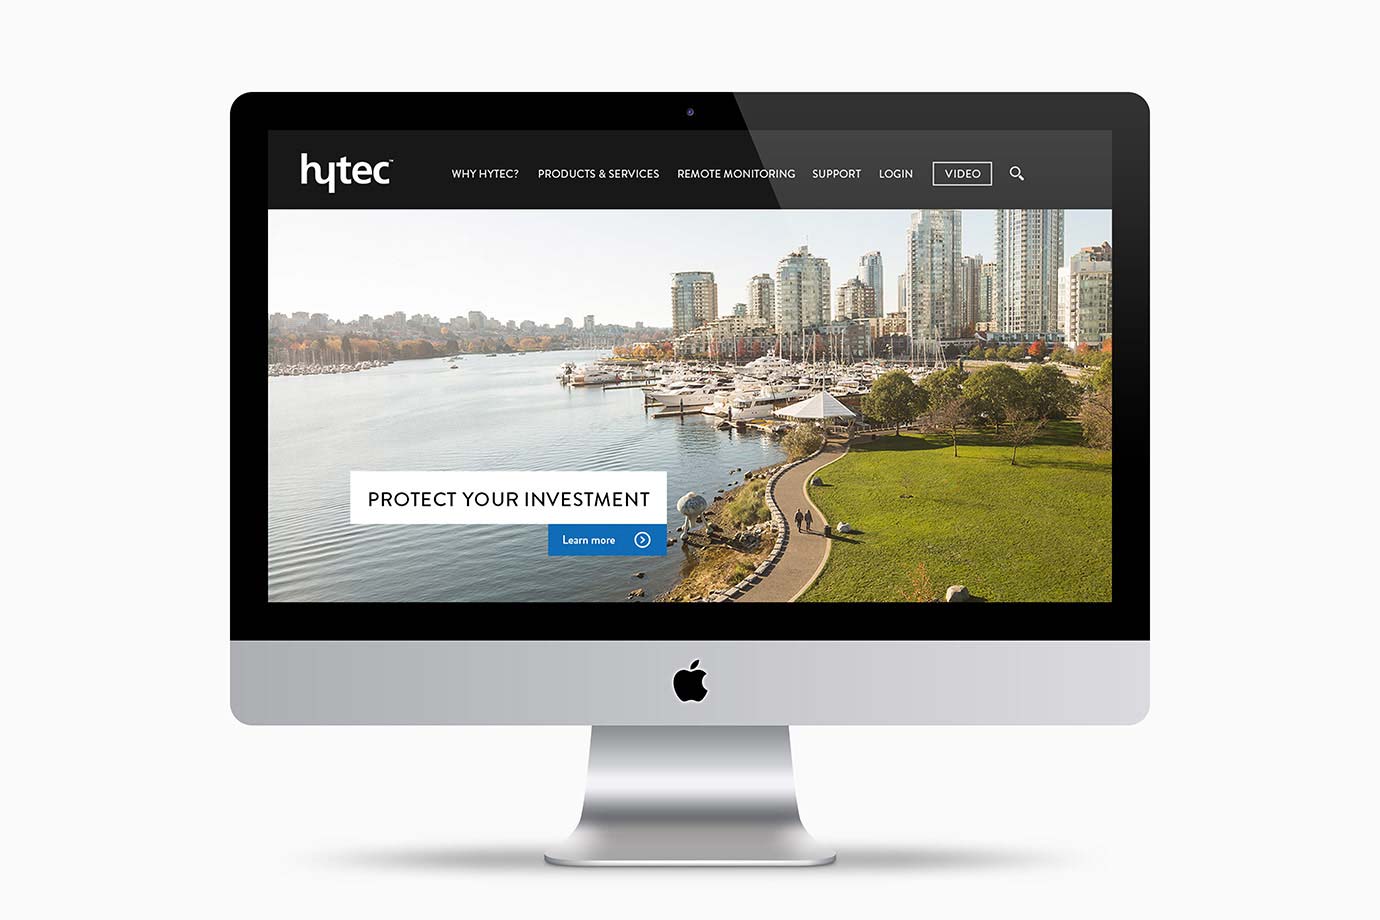 Anthony Hooper Graphic Design - Hytec Water Management Ltd. - Vancouver, BC